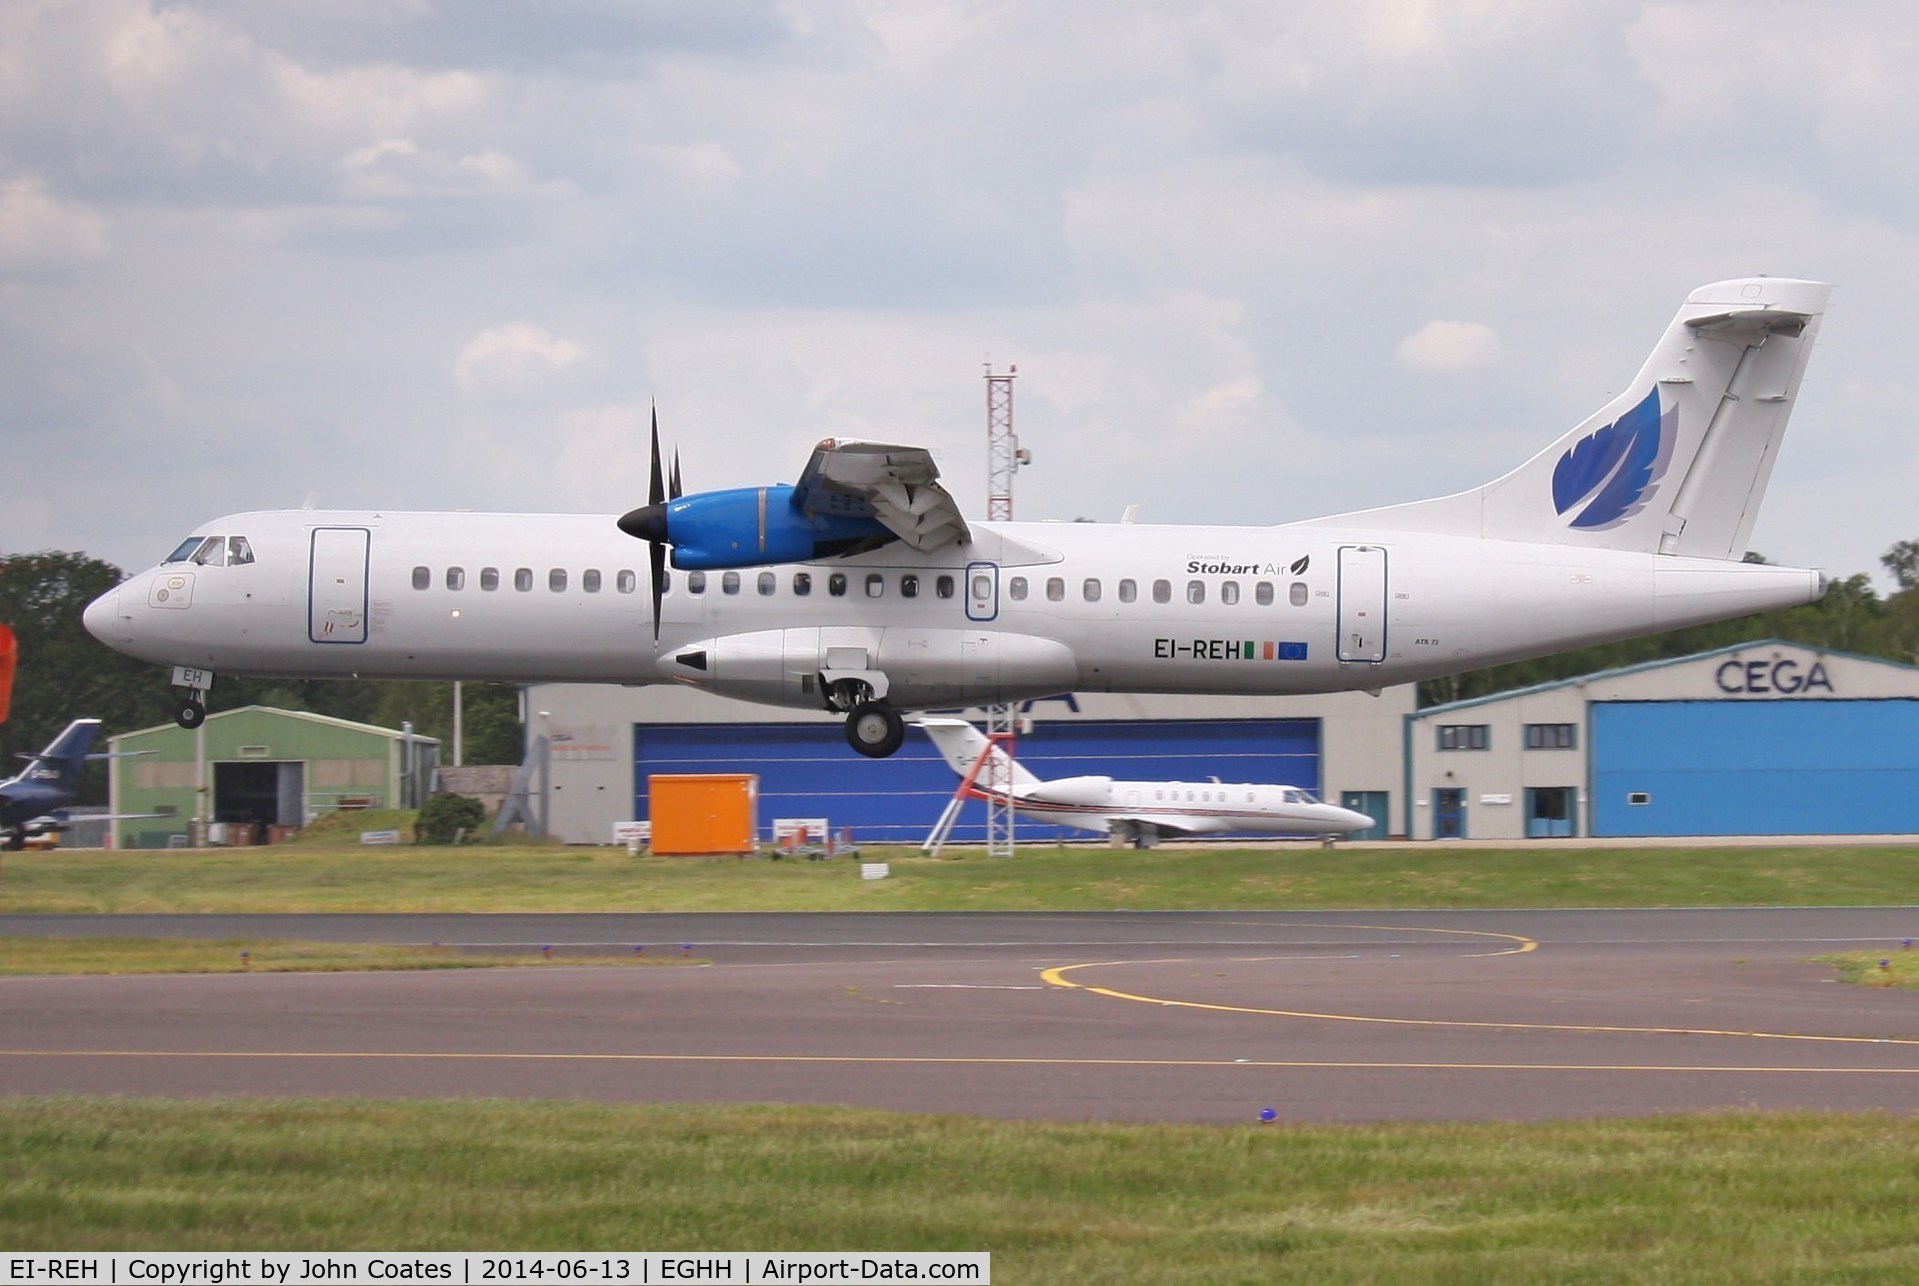 EI-REH, 1991 ATR 72-202 C/N 260, Second visit of first a/c to be painted in new Stobart Air 